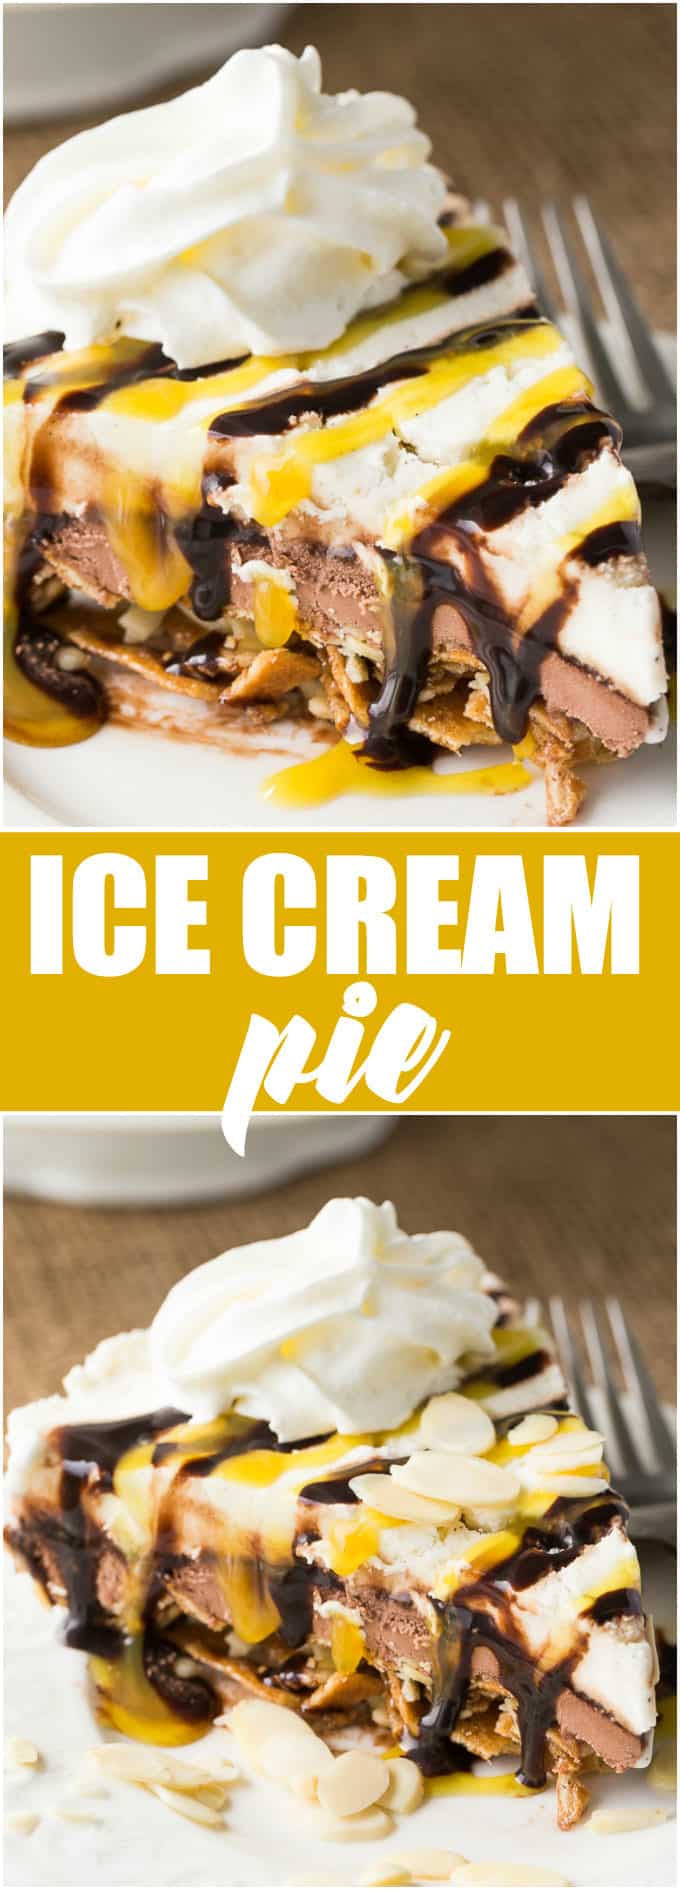 Ice Cream Pie - Layers of crushed waffle cones, chocolate syrup plus chocolate and vanilla ice cream make this cold dessert perfect for summer!